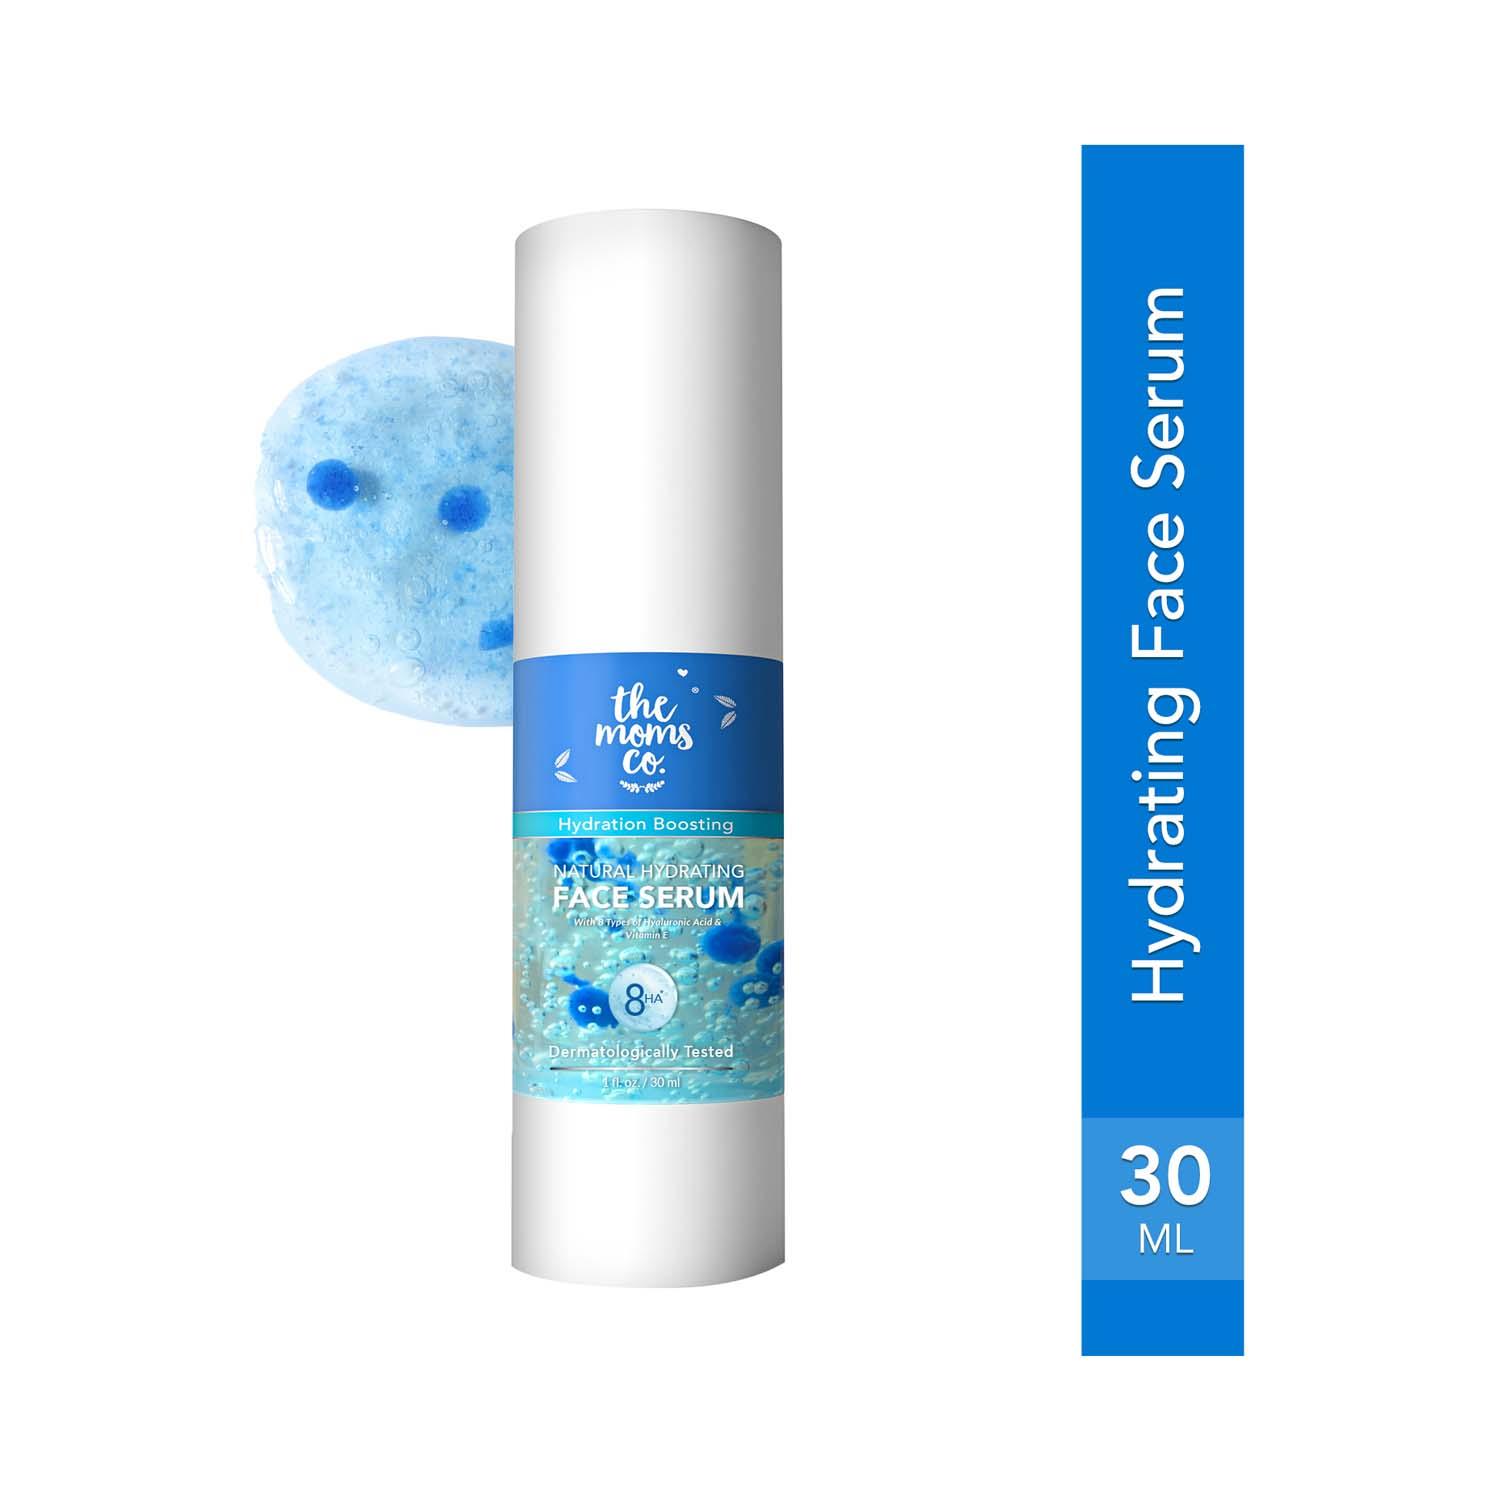 The Mom's Co. Natural Hydrating Face Serum with 8 Types of Hyaluronic Acid and Vitamin E (30g)